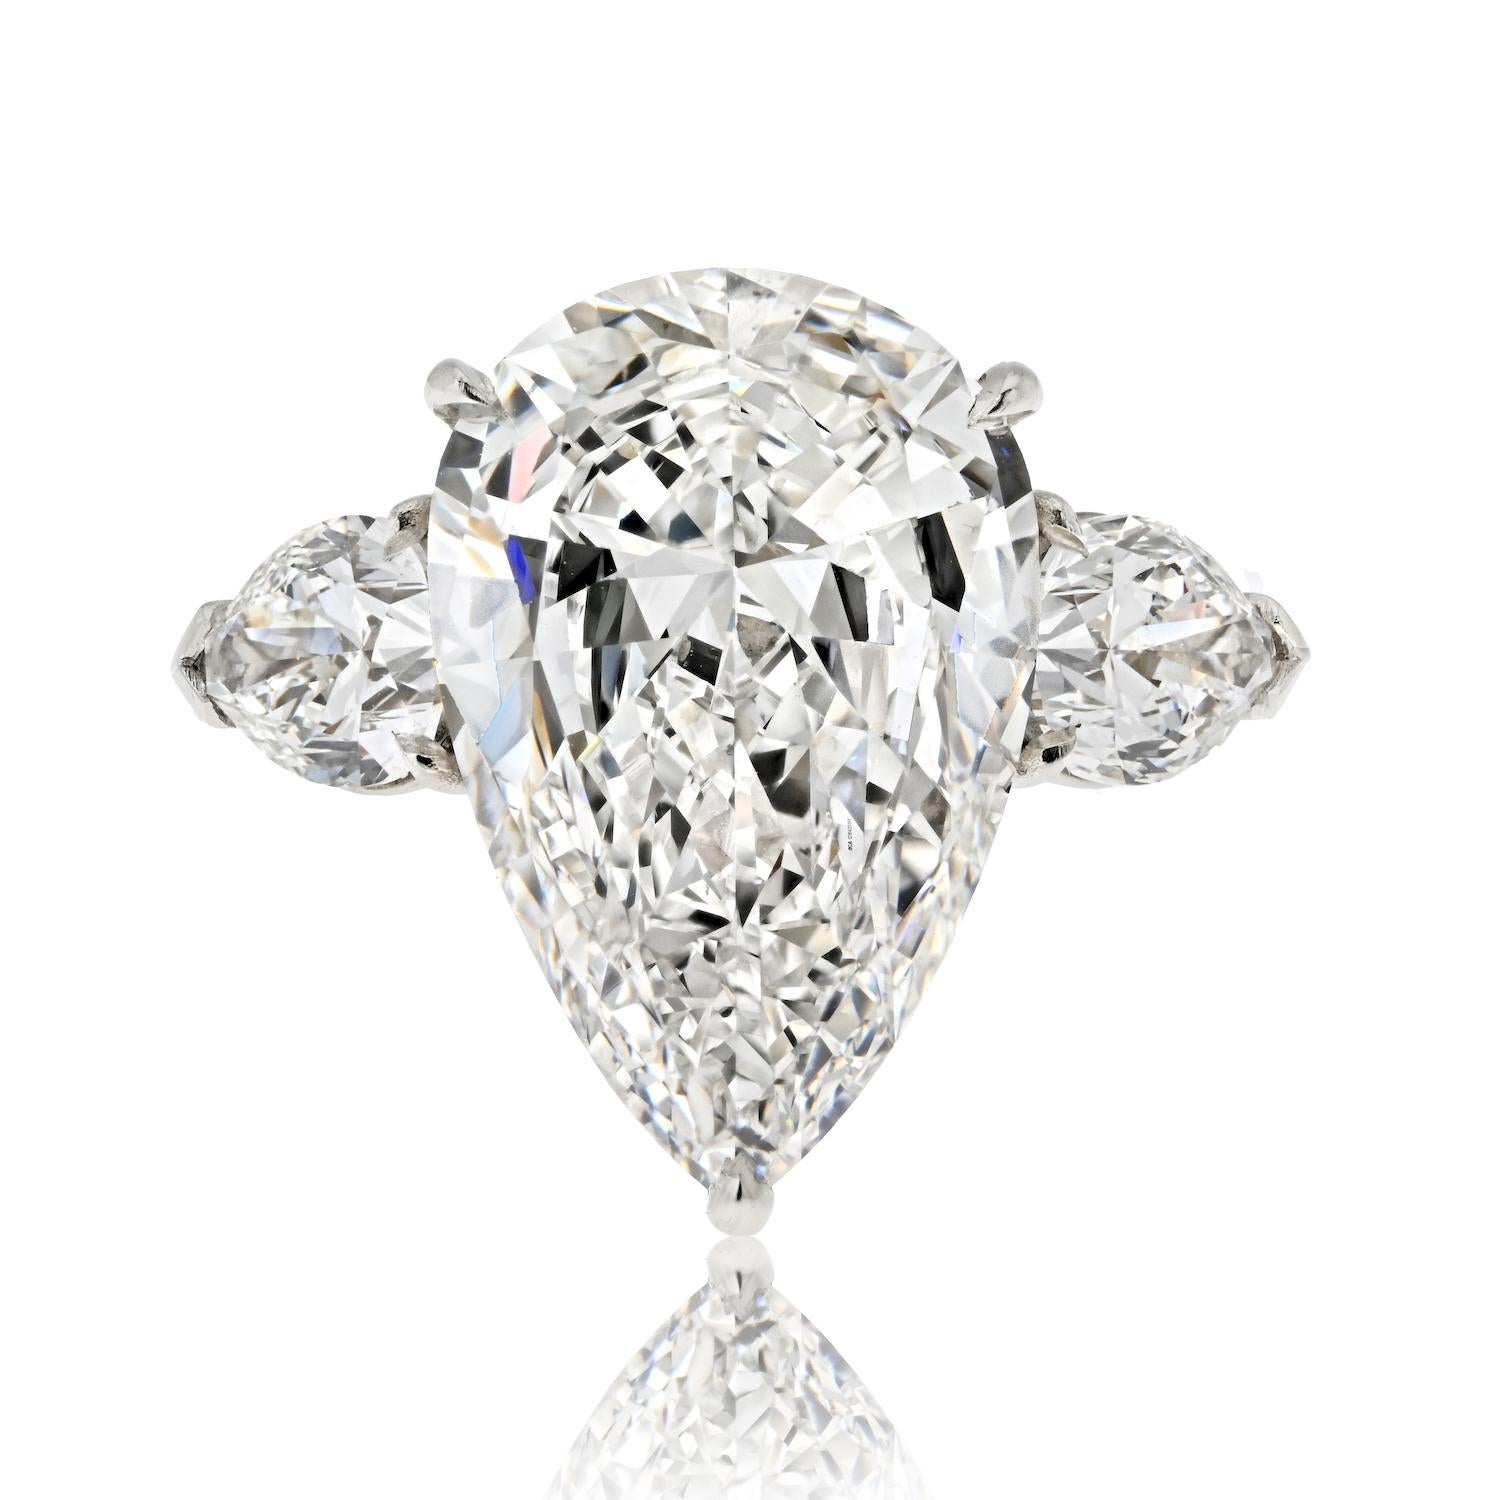 Elegance and sophistication converge in this exquisite 6.29ct F VS1 Pear Cut Three Stone Diamond Engagement Ring. It's not just a ring; it's a testament to your love story.

At its heart glistens a dazzling 6.29-carat pear-cut diamond, certified by